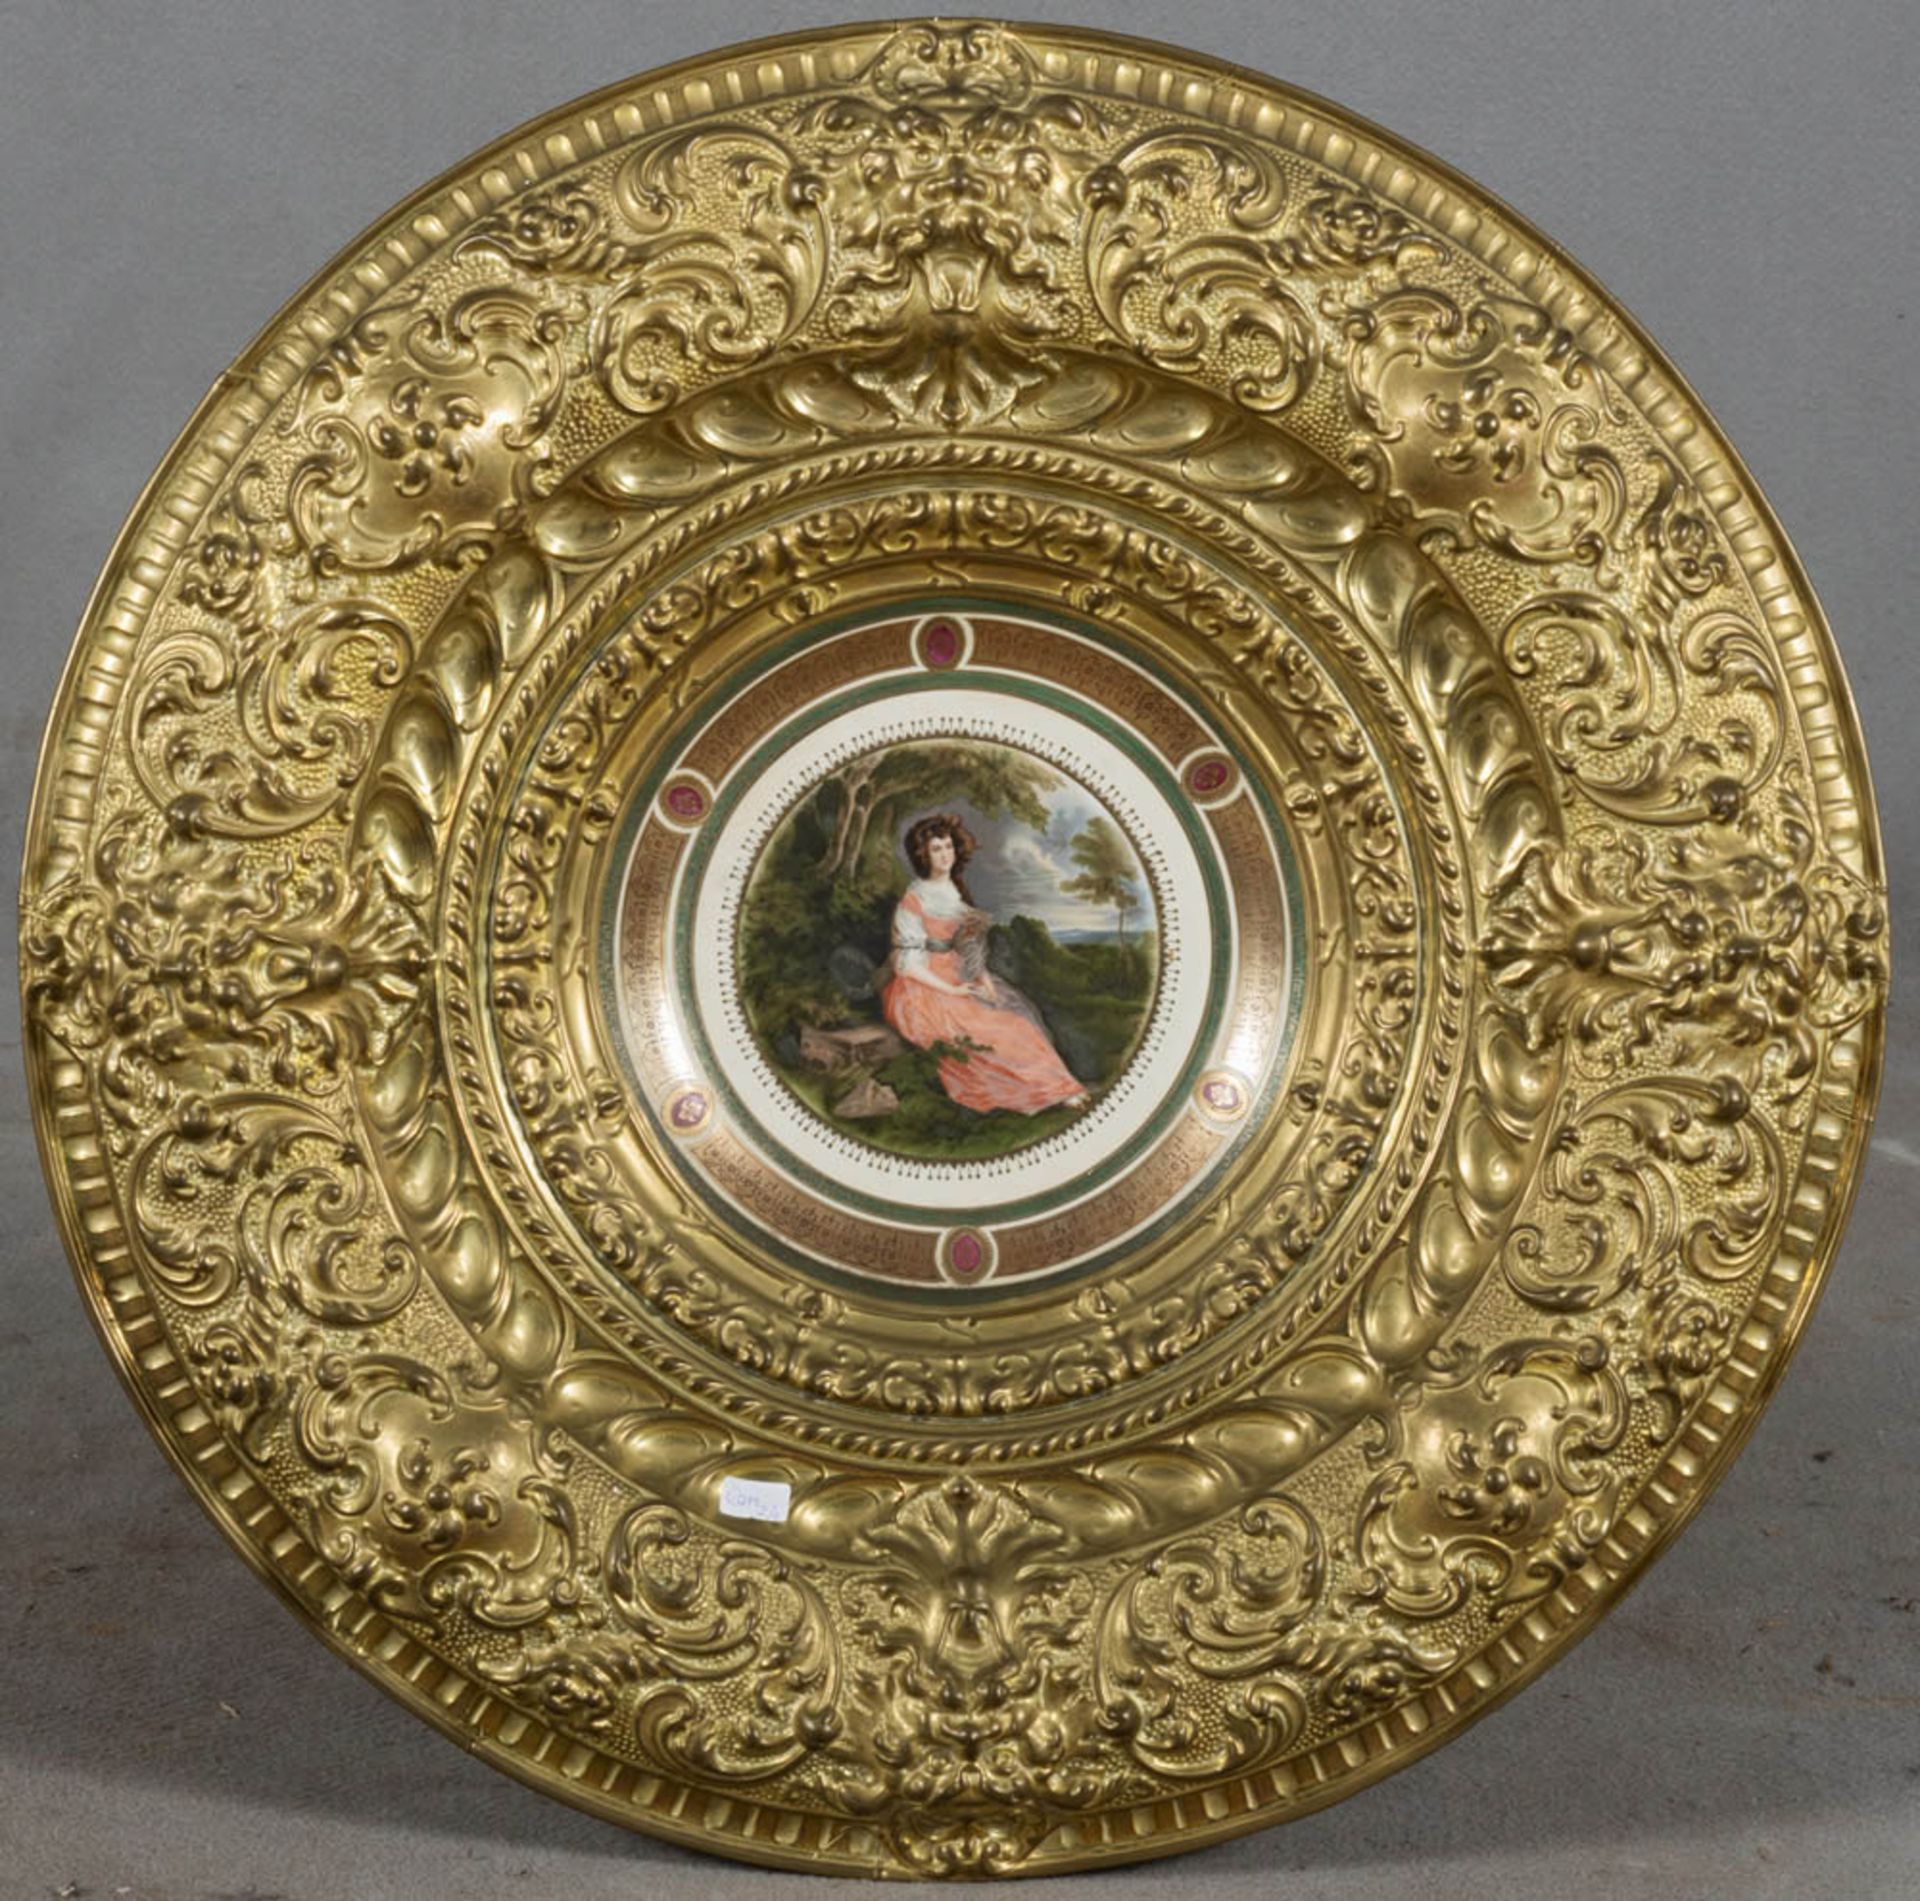 A PAIR OF PORCELAIN DISHES WITH FRAMES IN BRASS – END 19TH CENTURY - Image 2 of 2